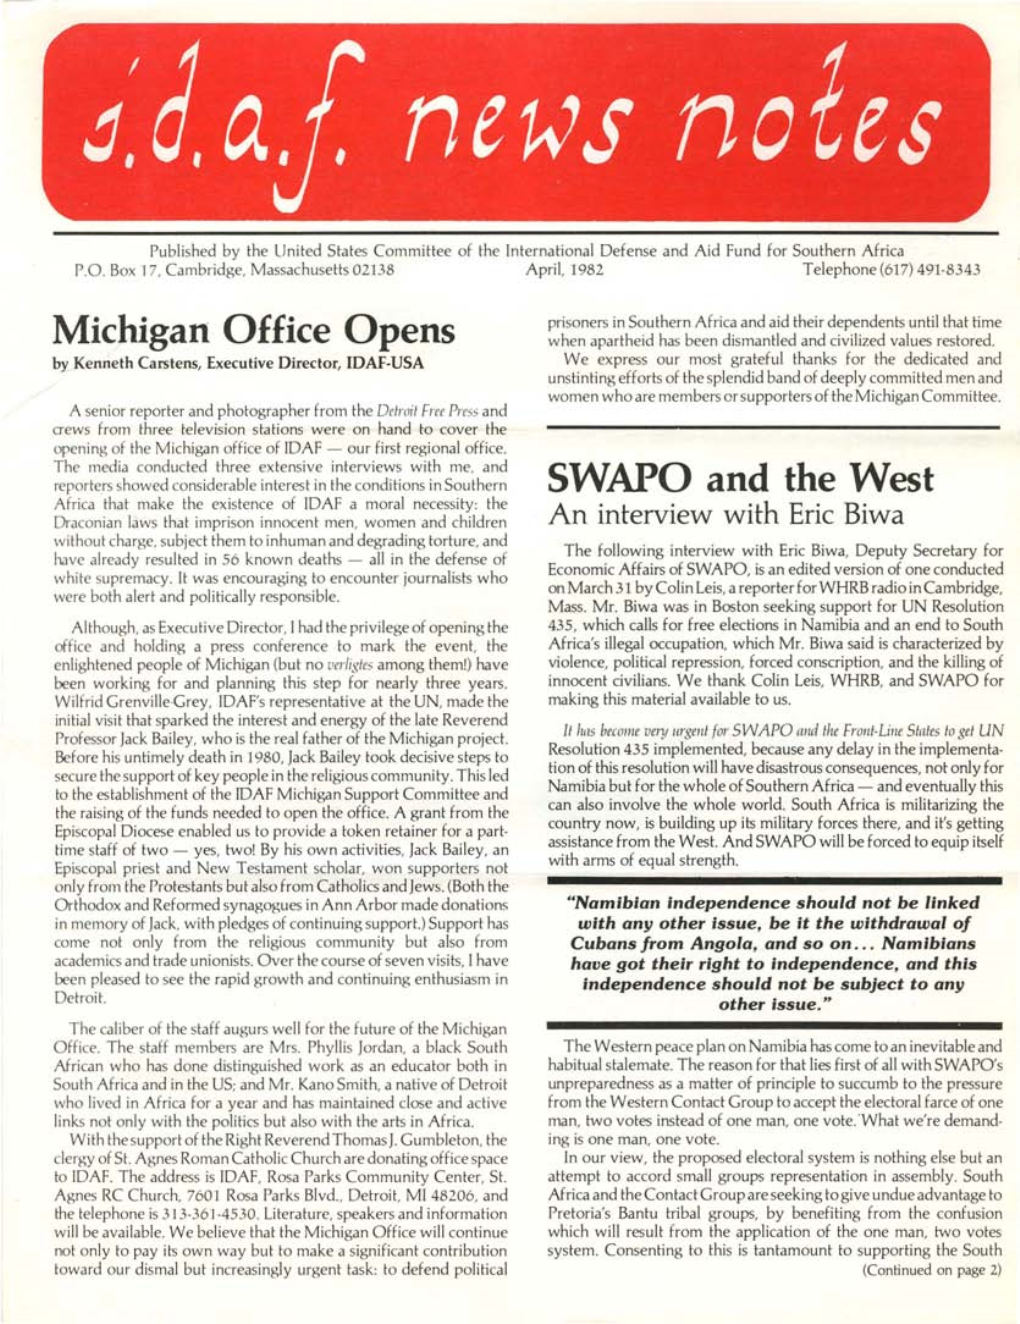 Michigan Office Opens SWAPO and the West